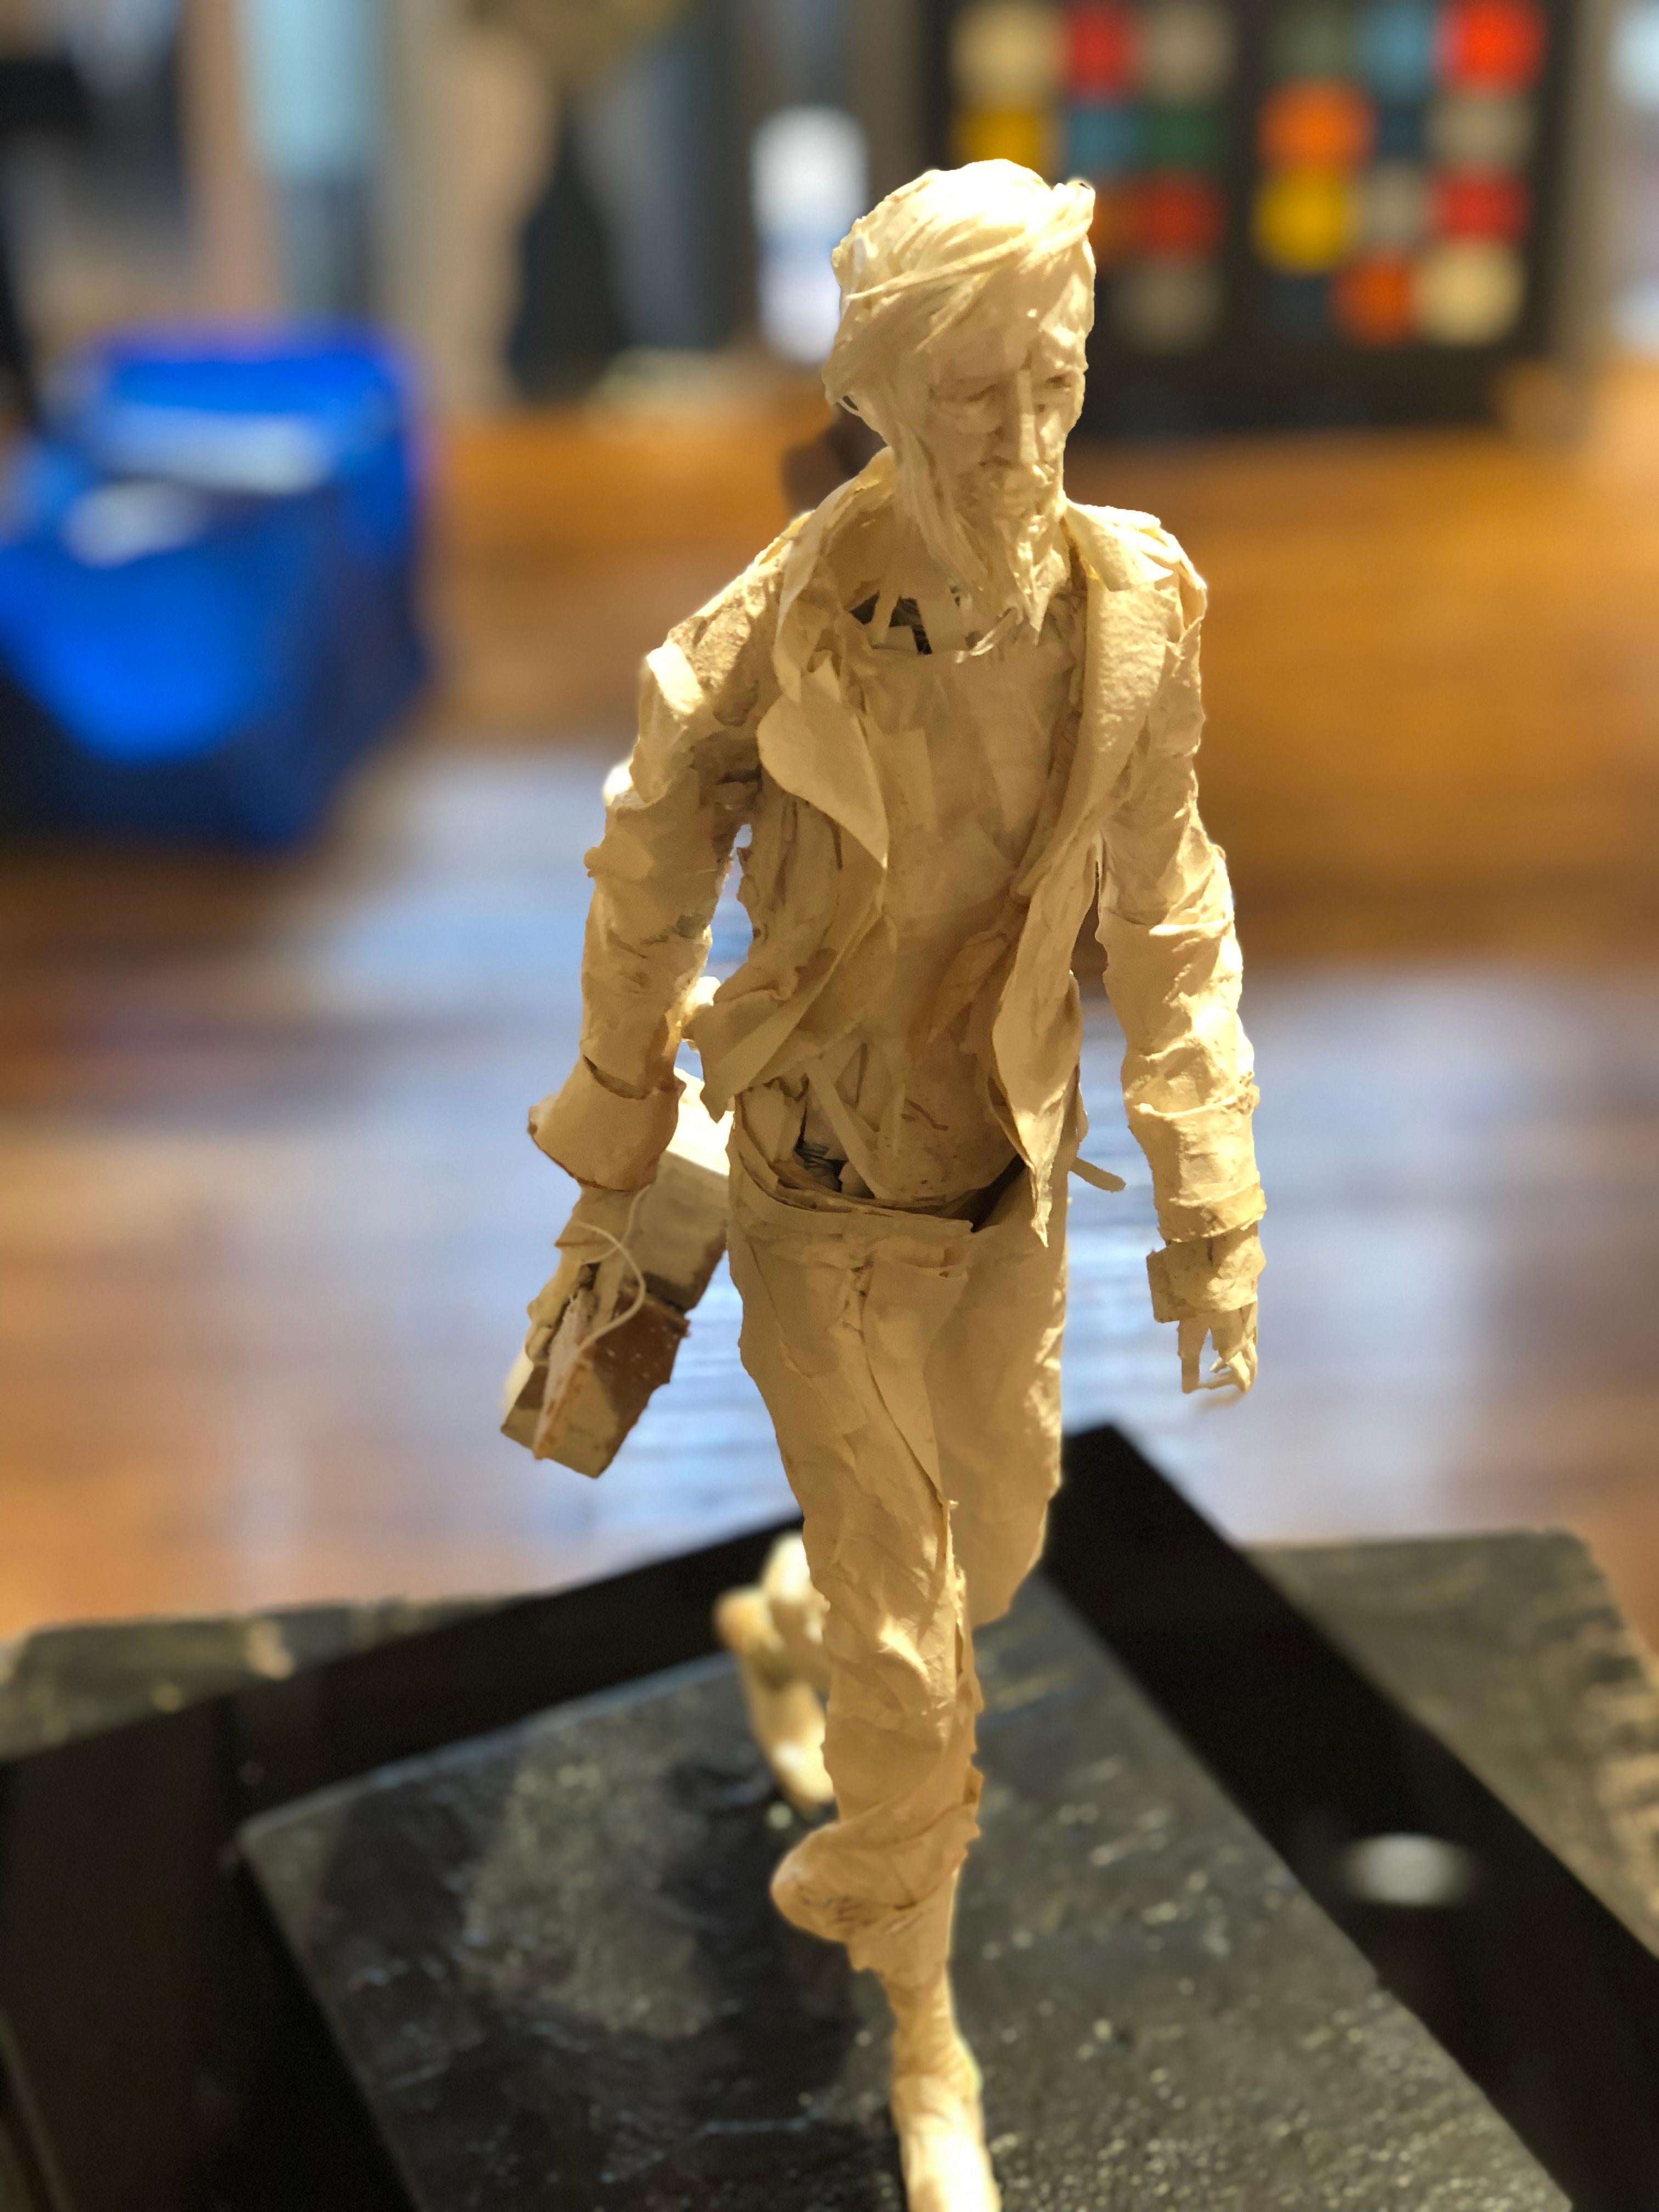 Jimmy - Handmade Paper Sculpture of a Street Musician with Guitar Walking - Contemporary Mixed Media Art by Ivan Markovic